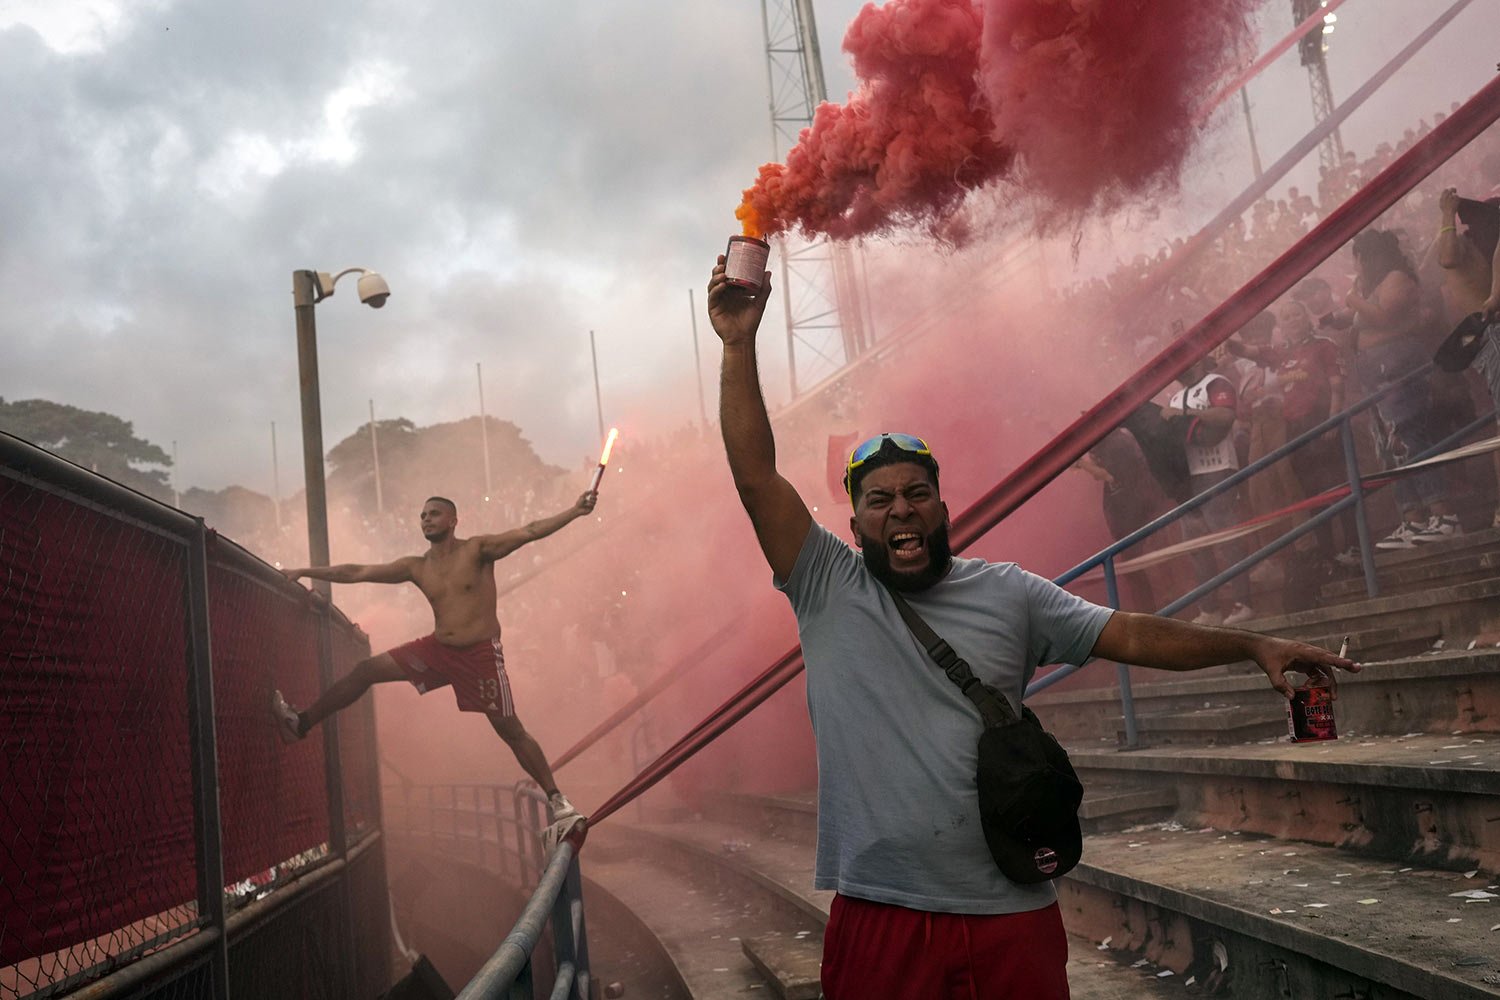  Members of the Caracas FC fan club, who call themselves The Red Demons, light flares during the derby soccer match against Deportivo Tachira at Estadio Olimpico in Caracas, Venezuela, Sunday, July 23, 2023. (AP Photo/Matias Delacroix) 